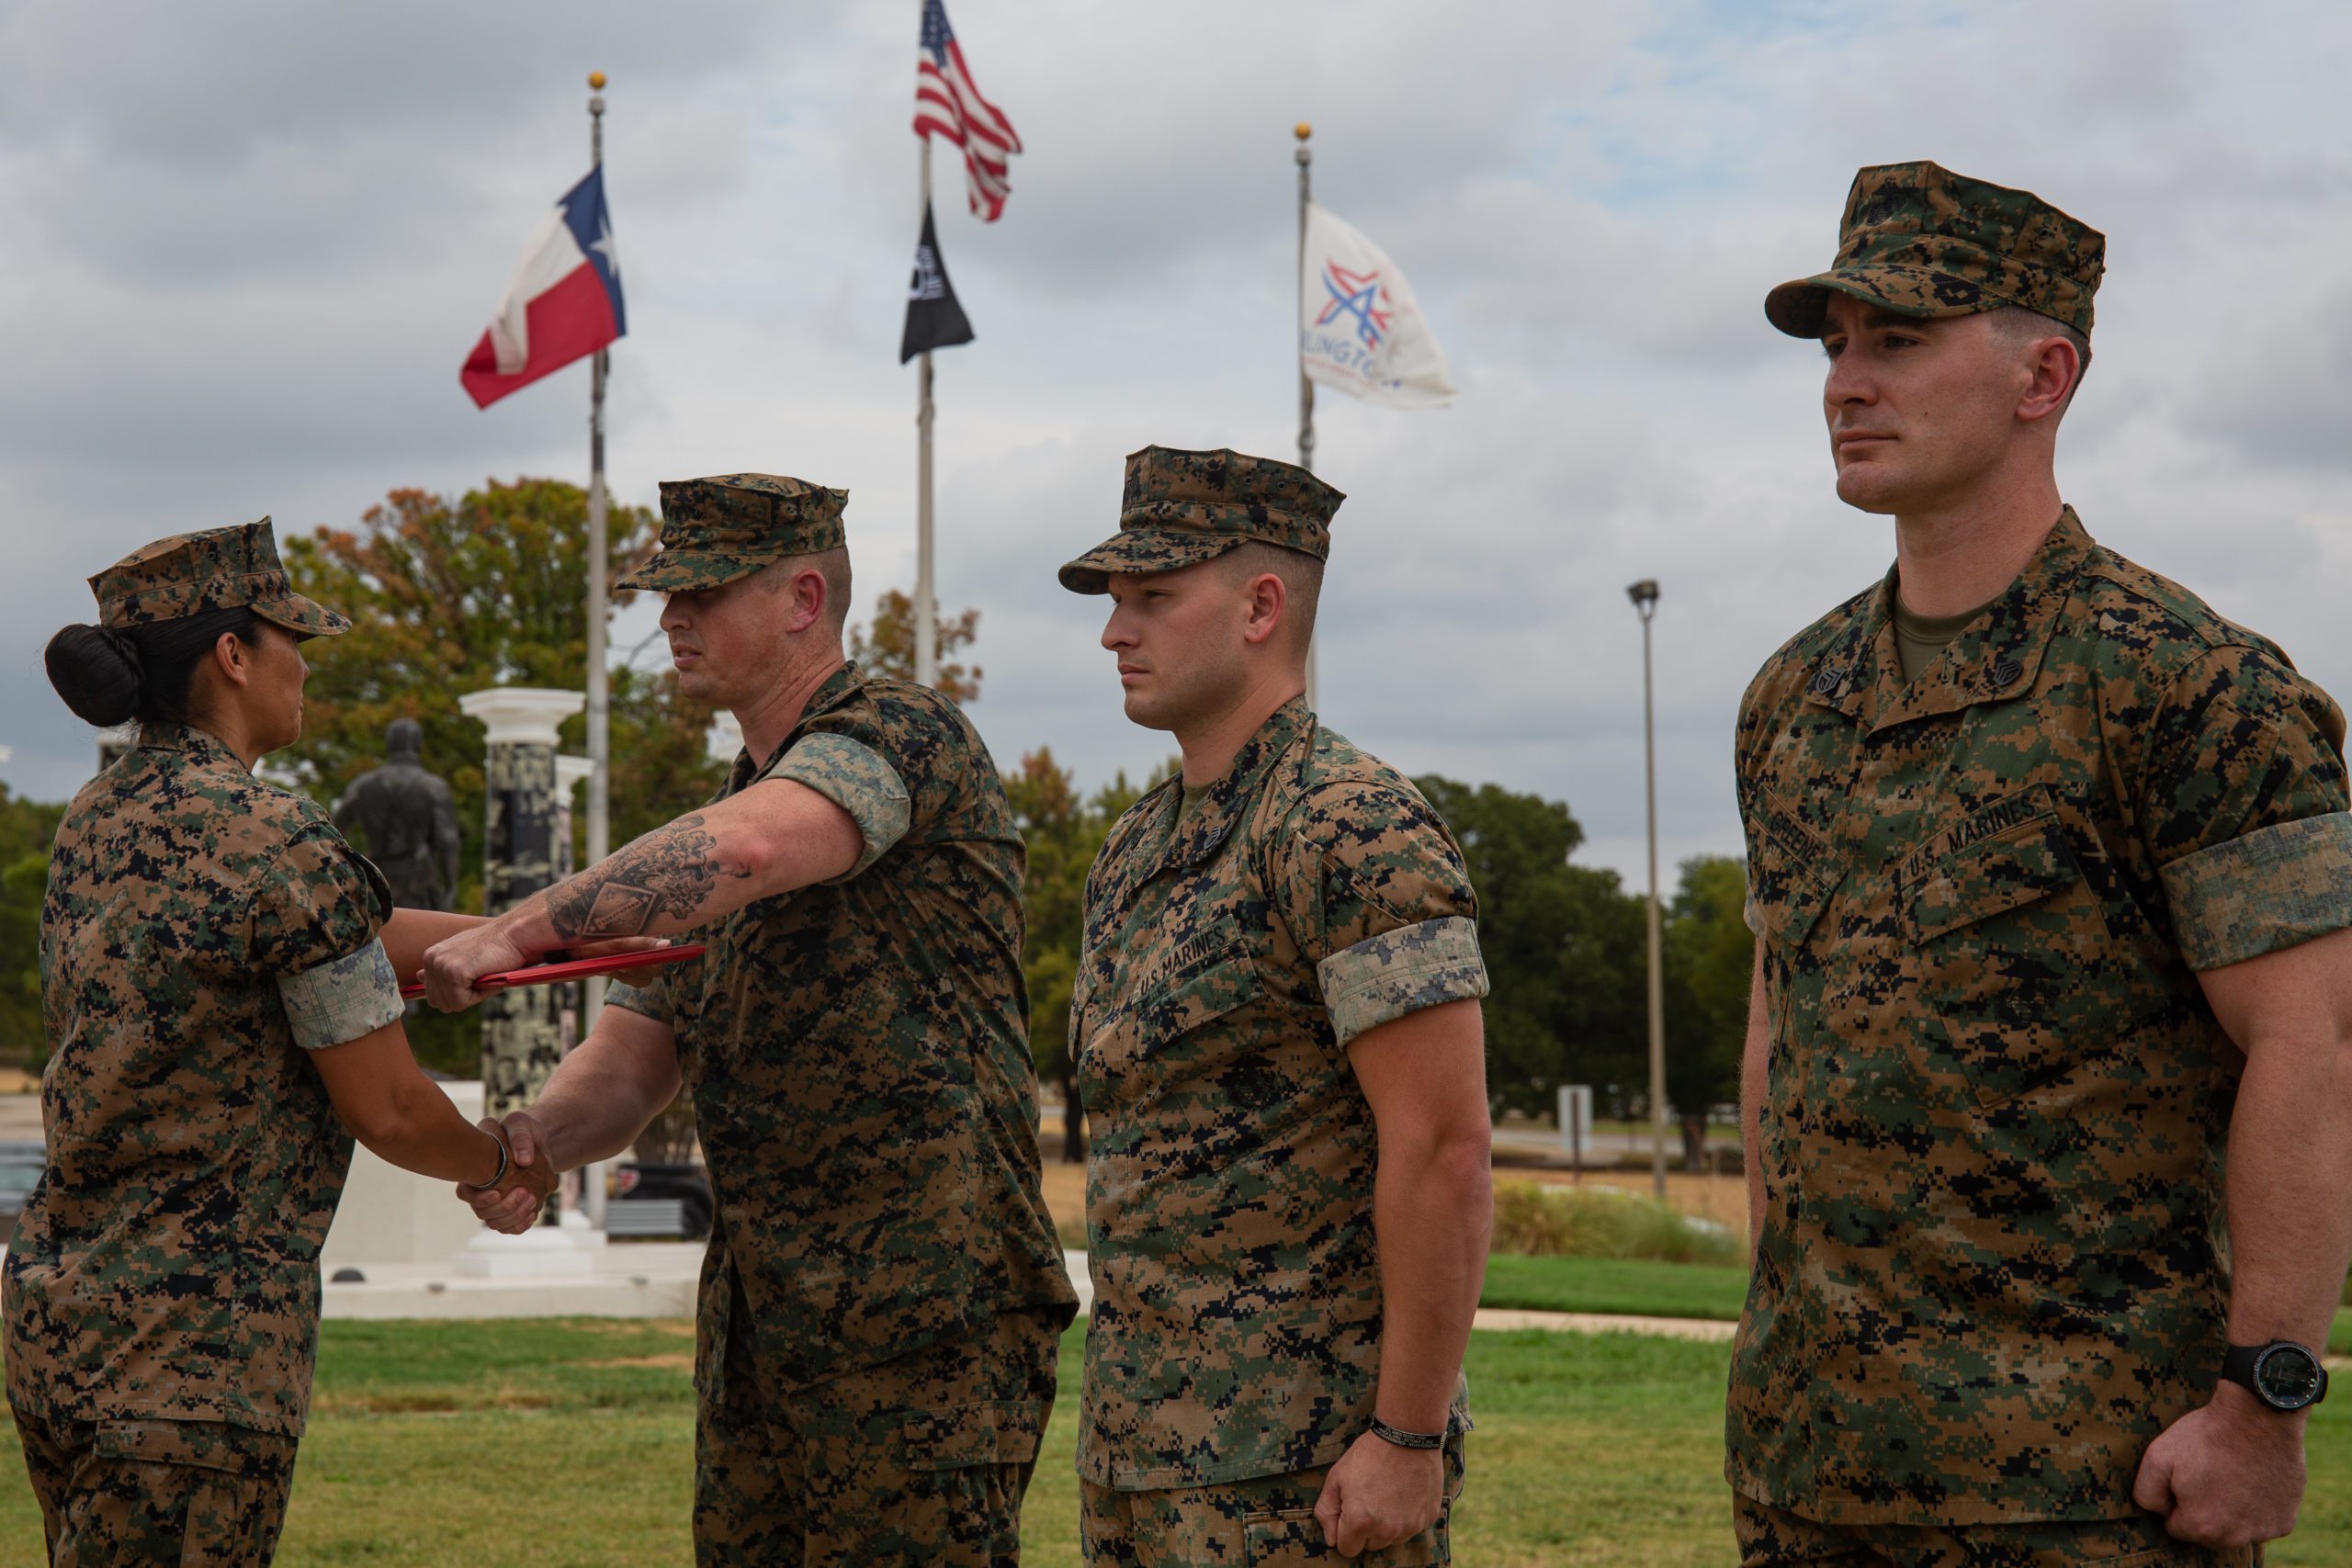 Three Marines Awarded Medals for Selfless Heroism